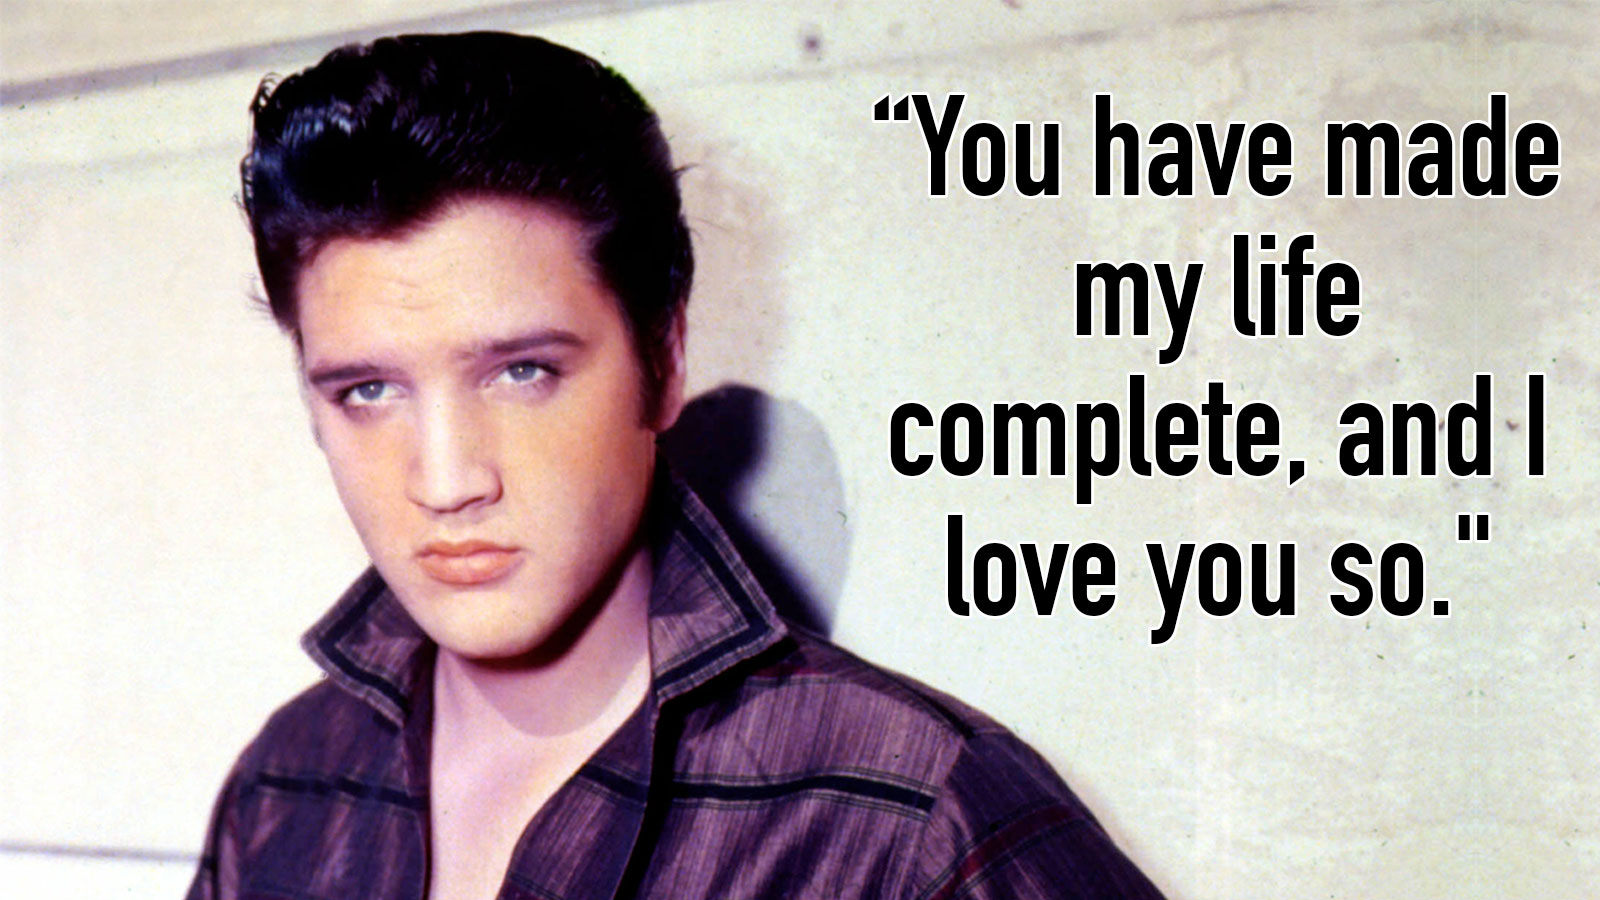 Can You Guess Which Elvis Presley Song This Lyric Is From? 51